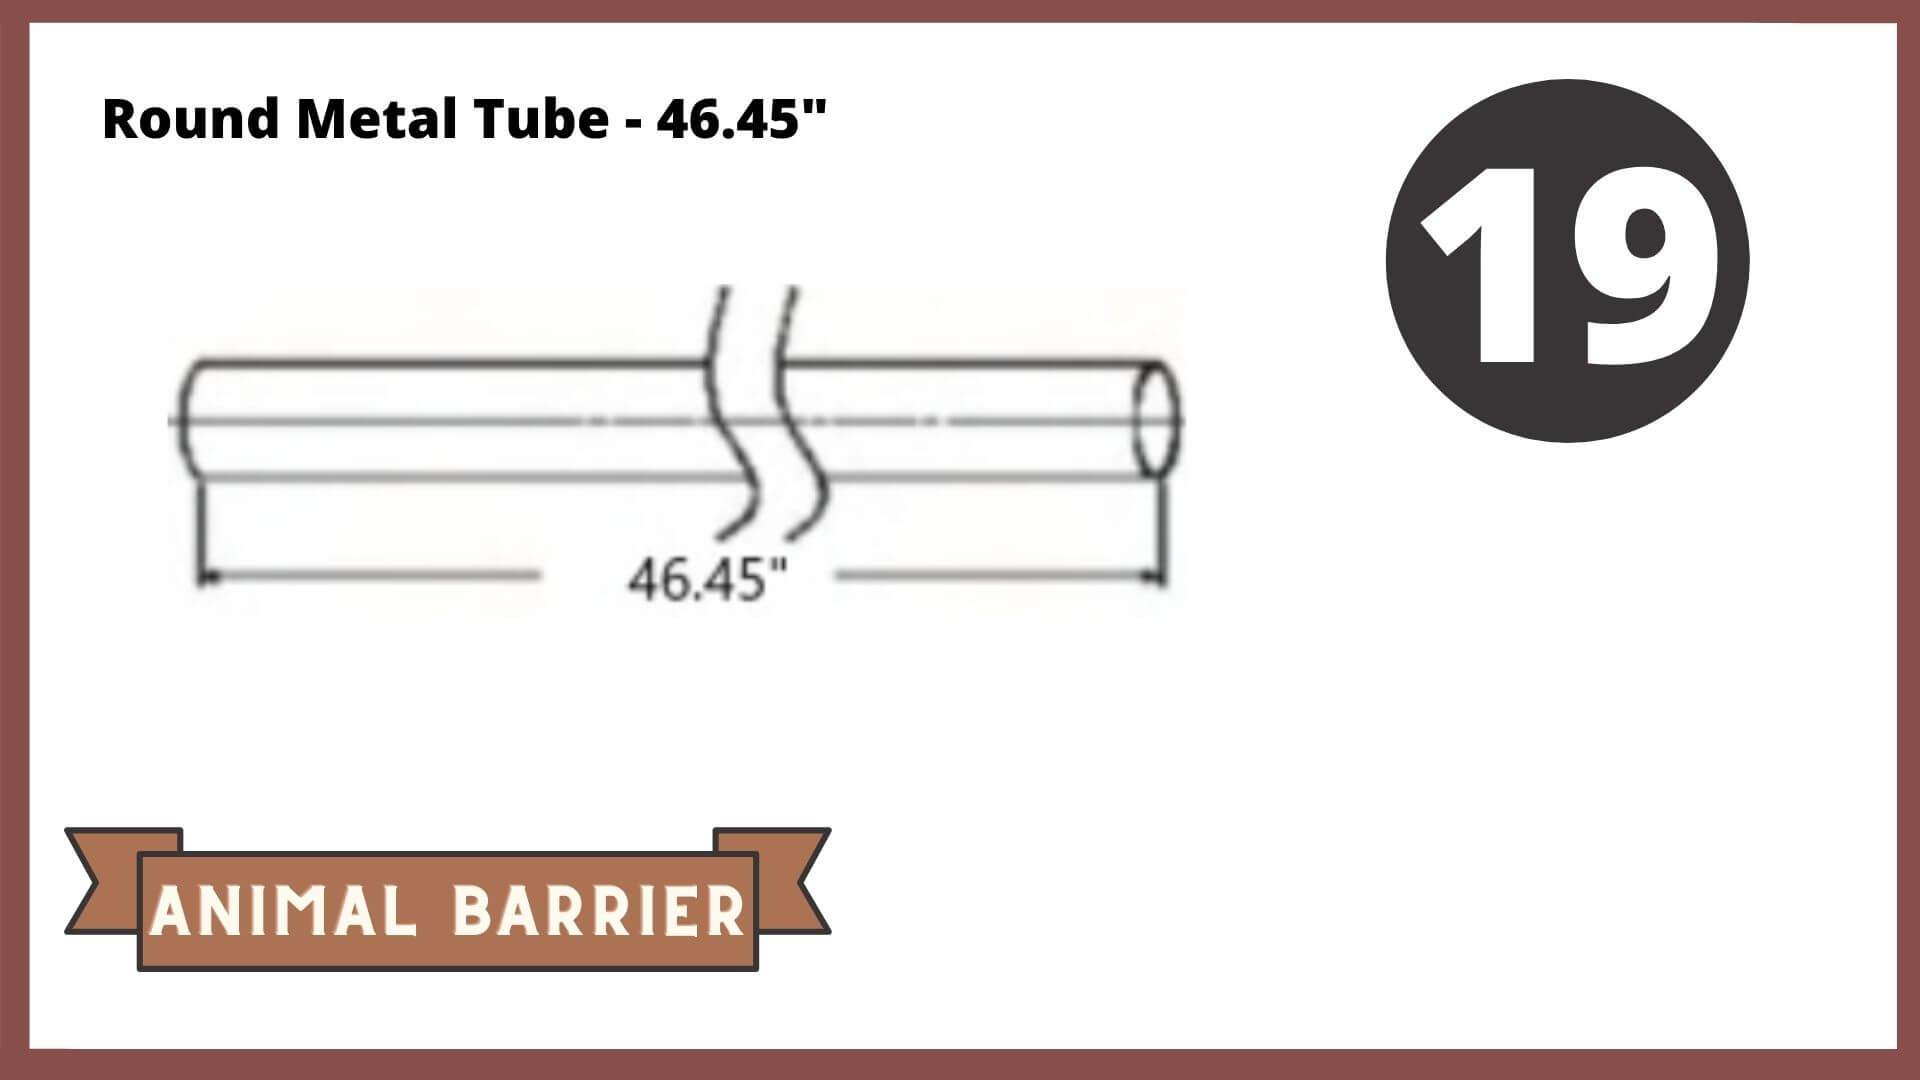 REPLACEMENT PARTS for: Stack & Extend Animal Barrier Kits & Gardens Accessories Frame It All Part #19 - Horizontal Round Metal Tube - 46.45" (straight) 